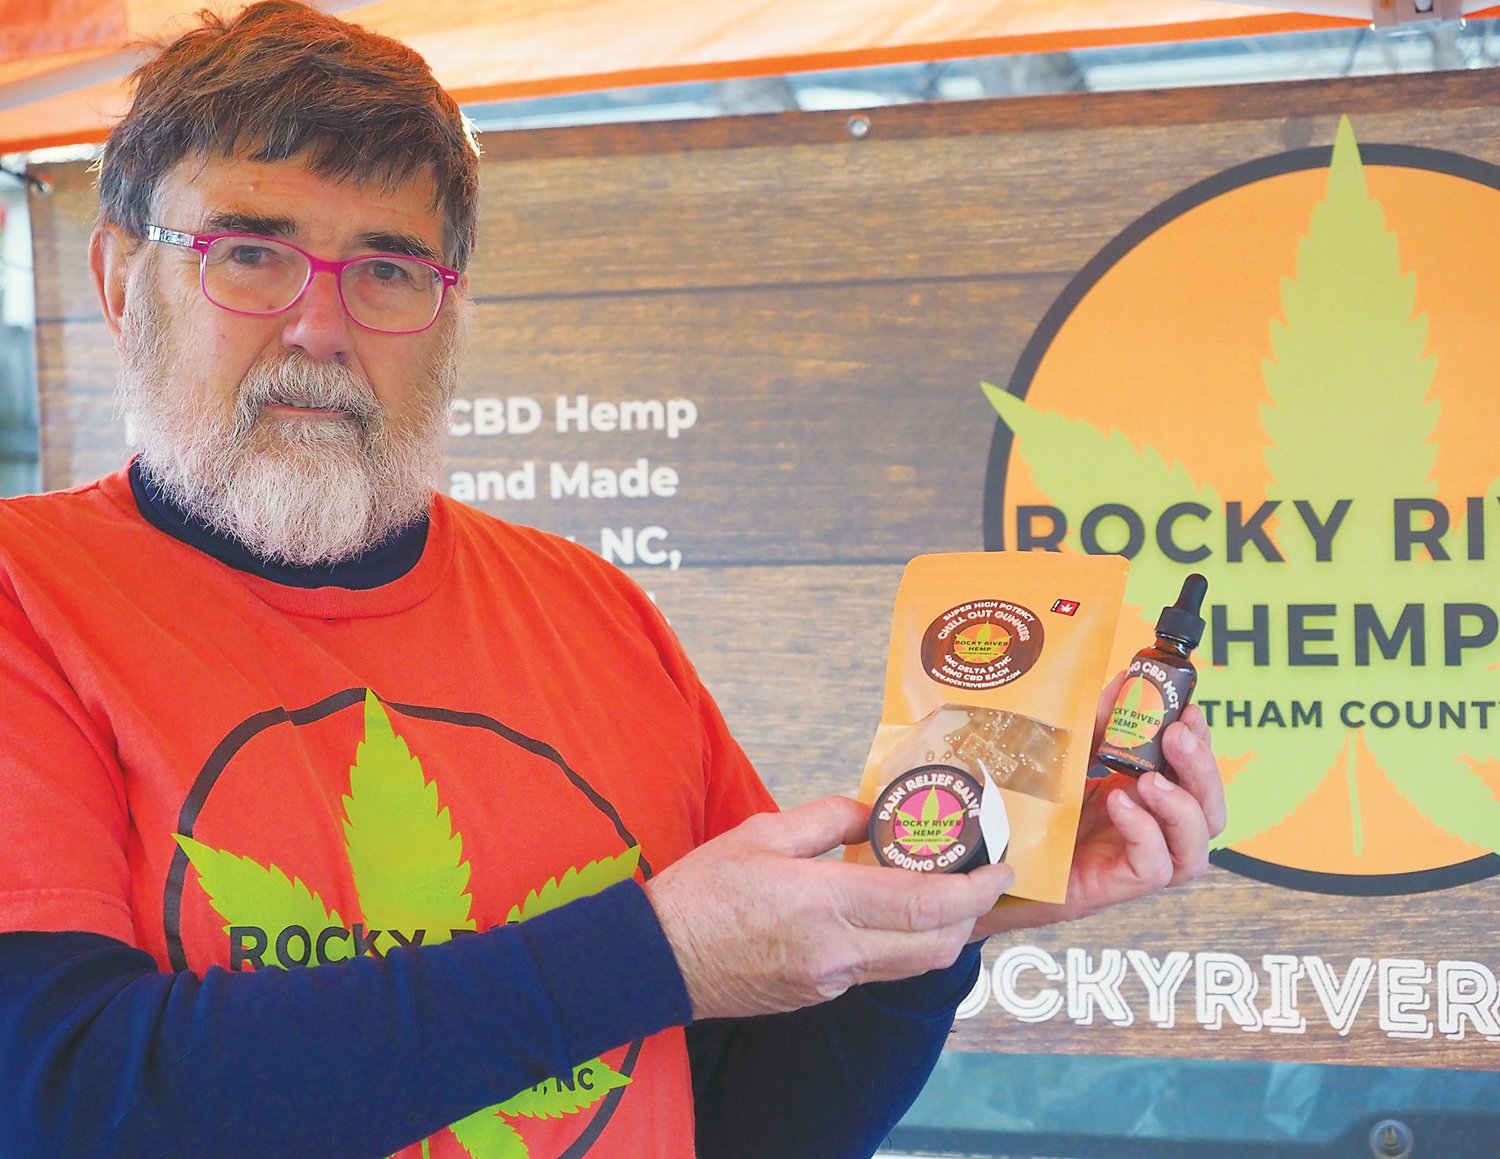 Rick Brownfield displays Rocky River Hemp products at his business' booth at the Pittsboro Farmers Market.